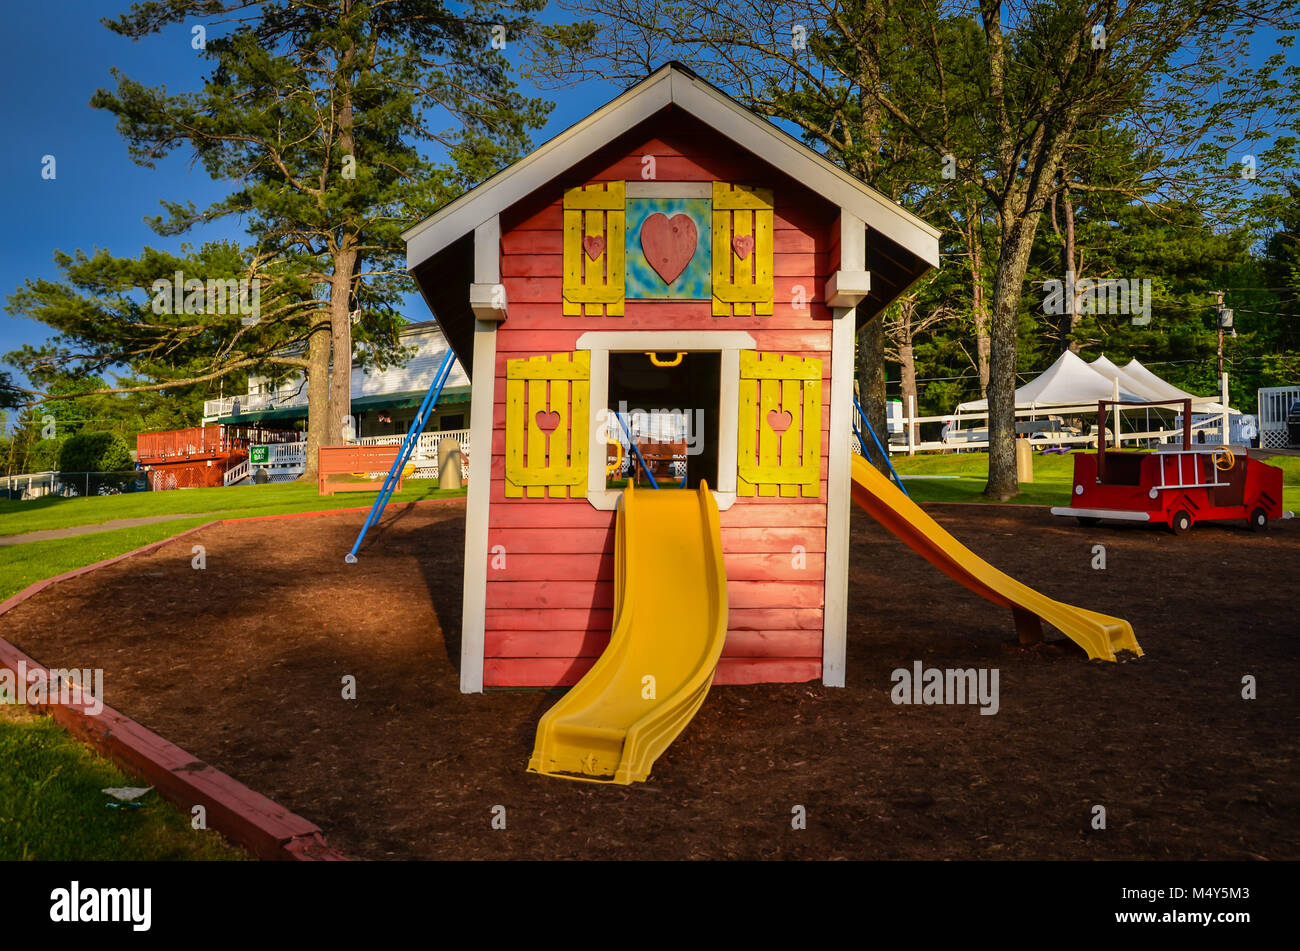 Colorful Playhouse with yellow slides on playground. Stock Photo